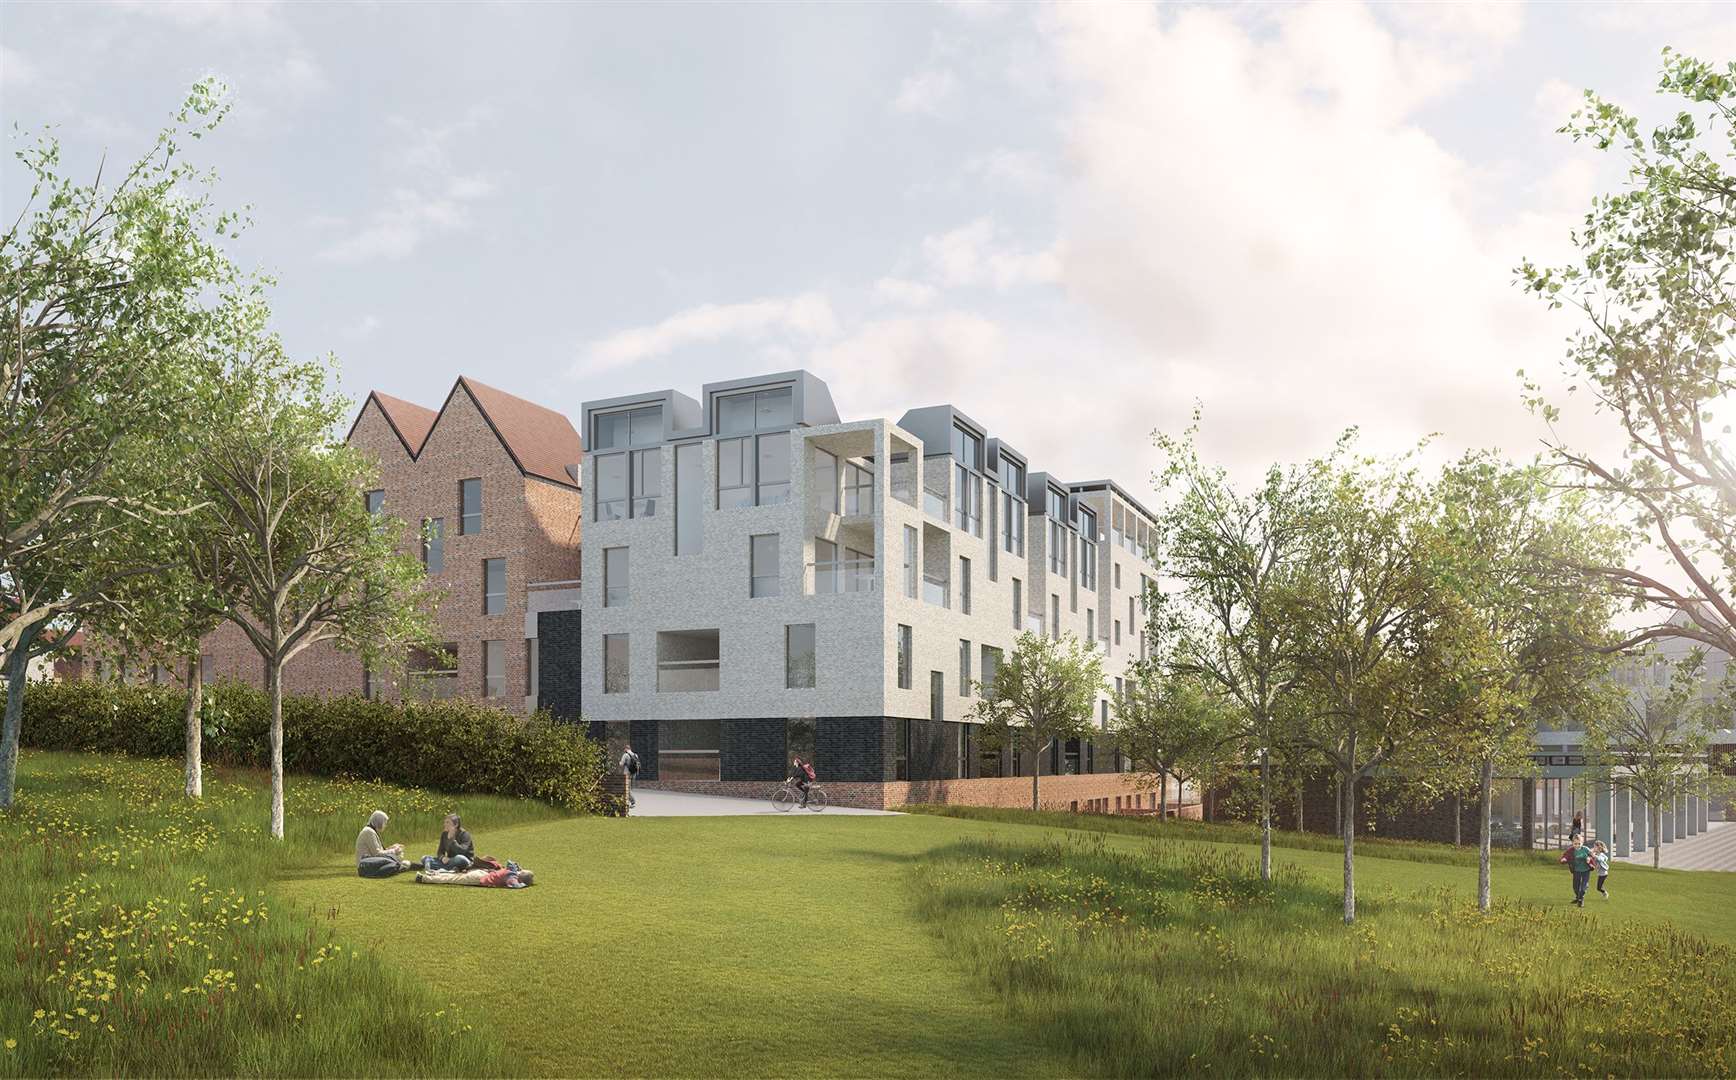 An artist's impression of part of the planned Mountfield Park development